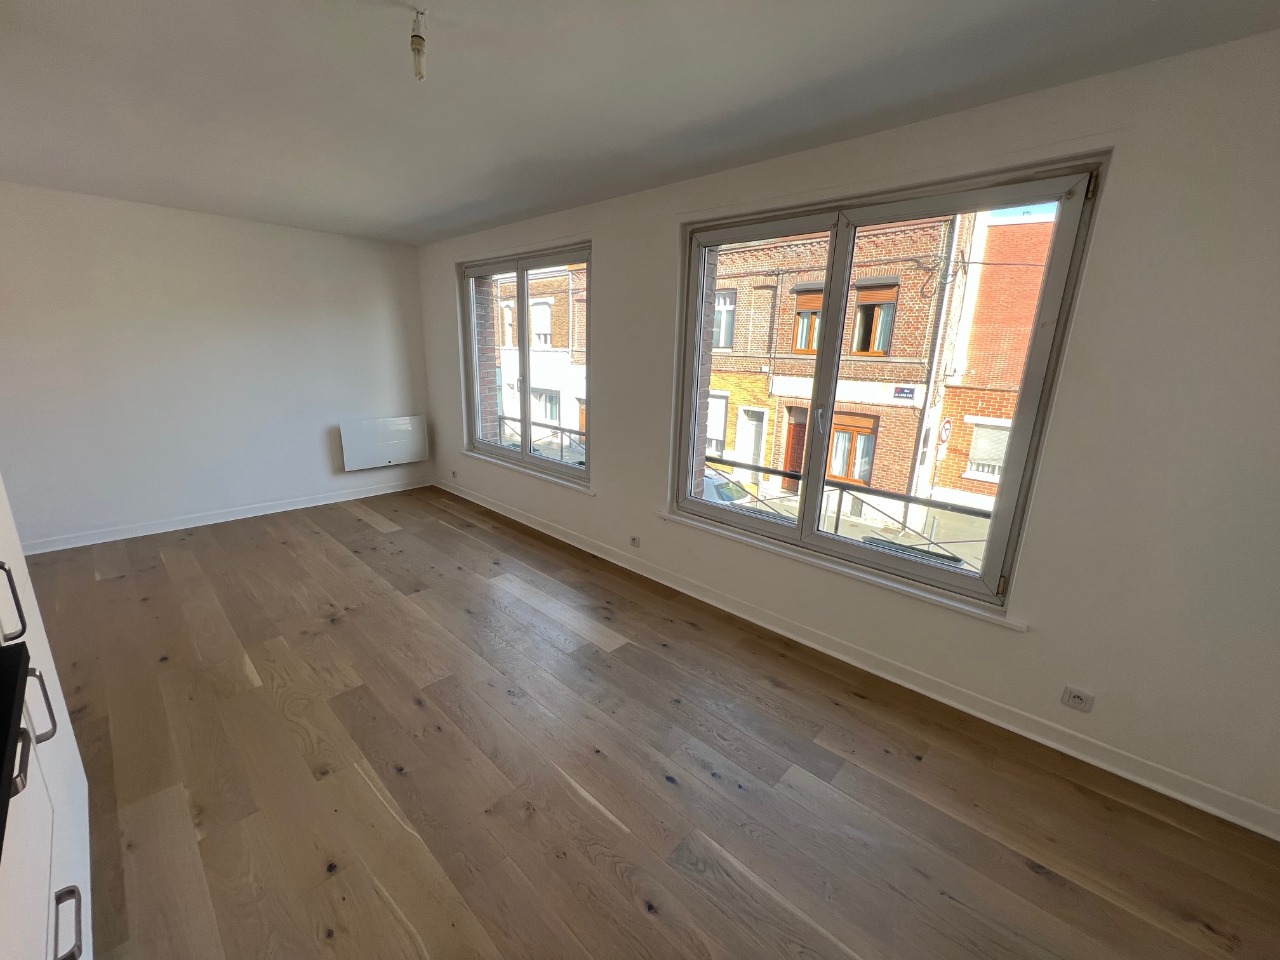 T2 renove Photo 4 - JLW Immobilier